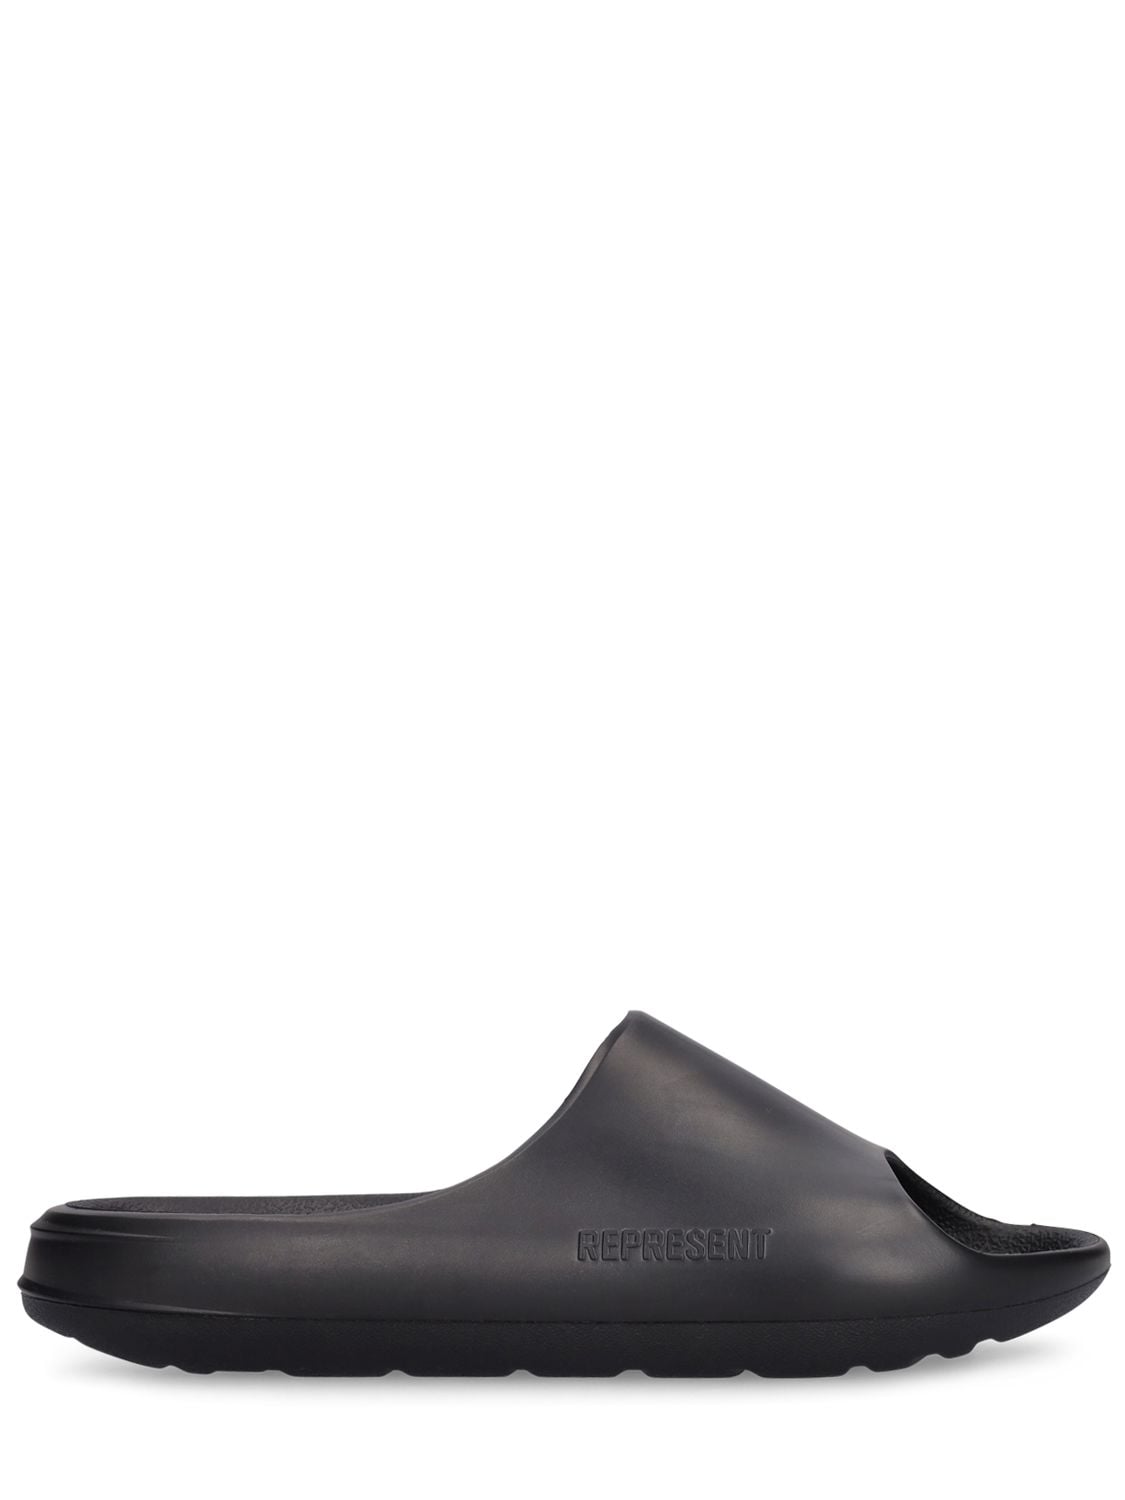 Rubber Slide Sandals | The Hoxton Trend